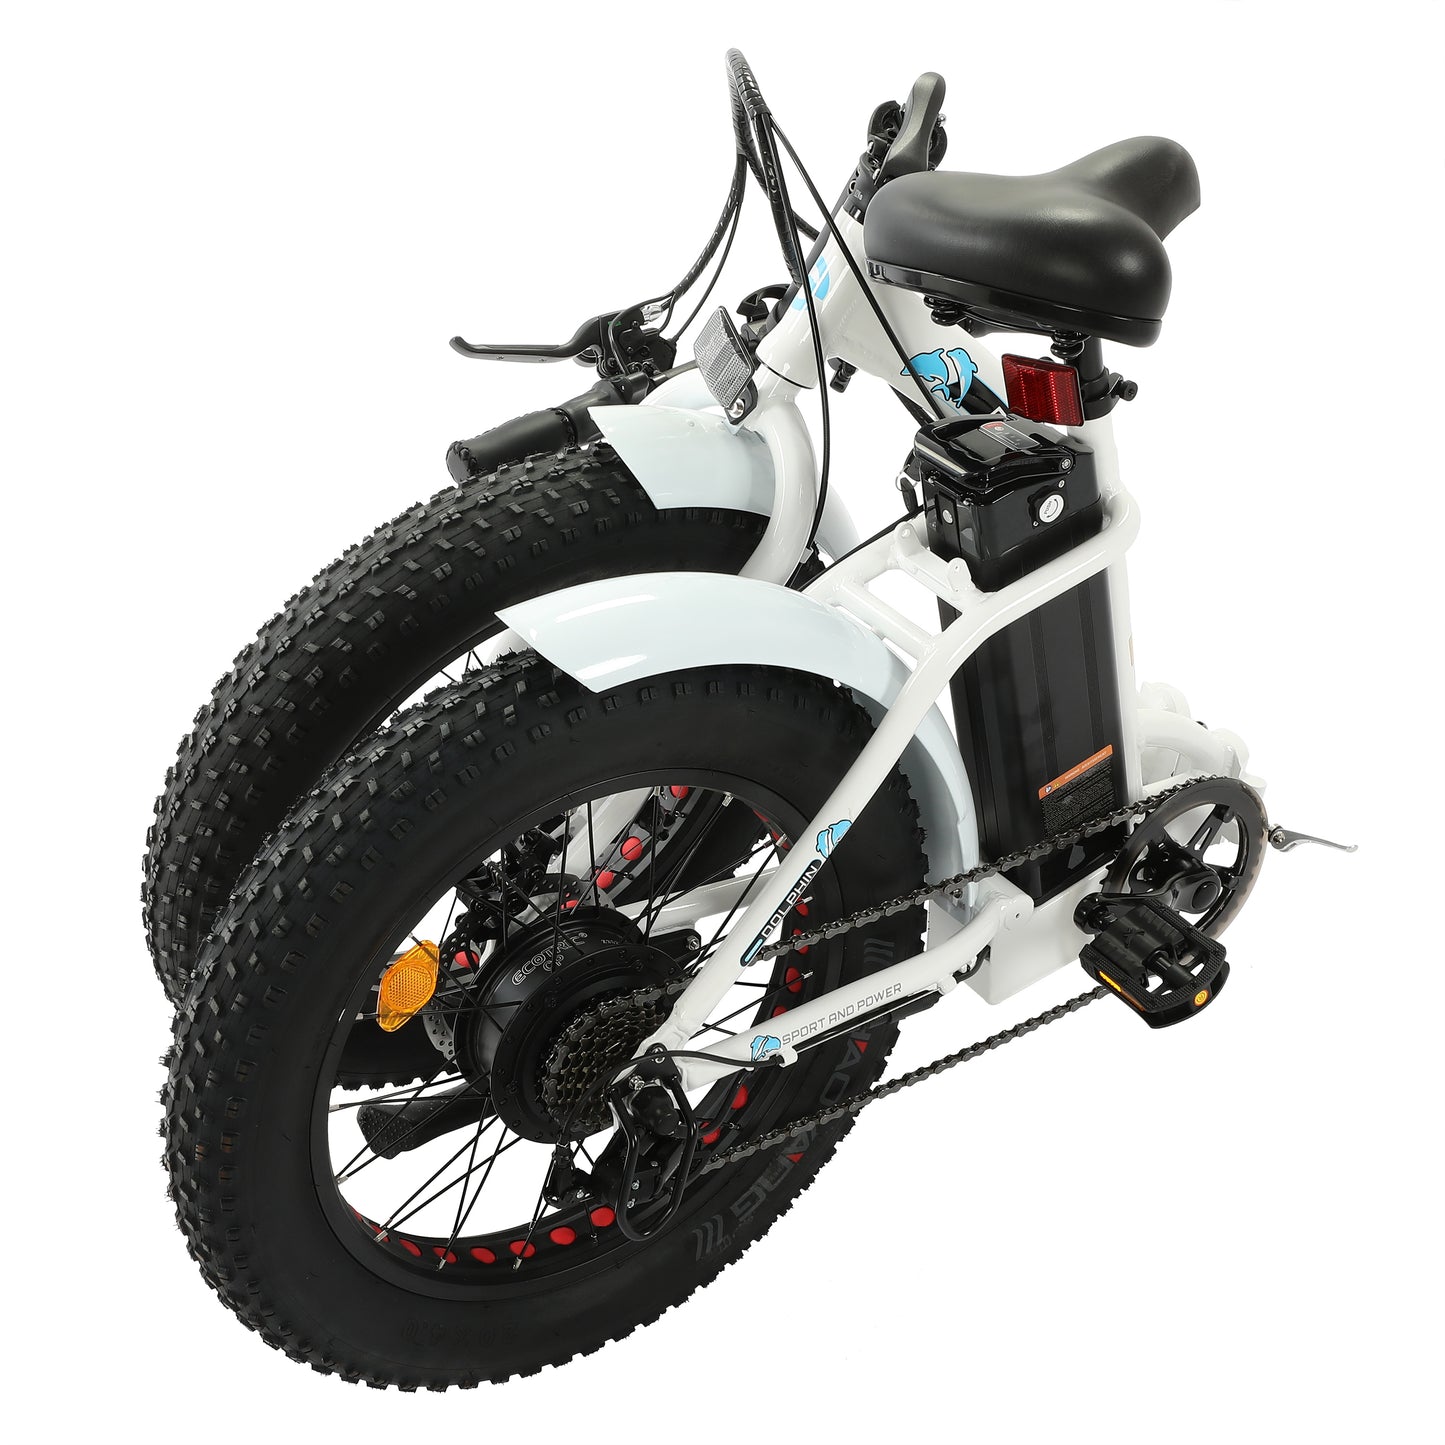 UL Certified-Ecotric Portable and Folding Fat Bike Model Dolphin - White